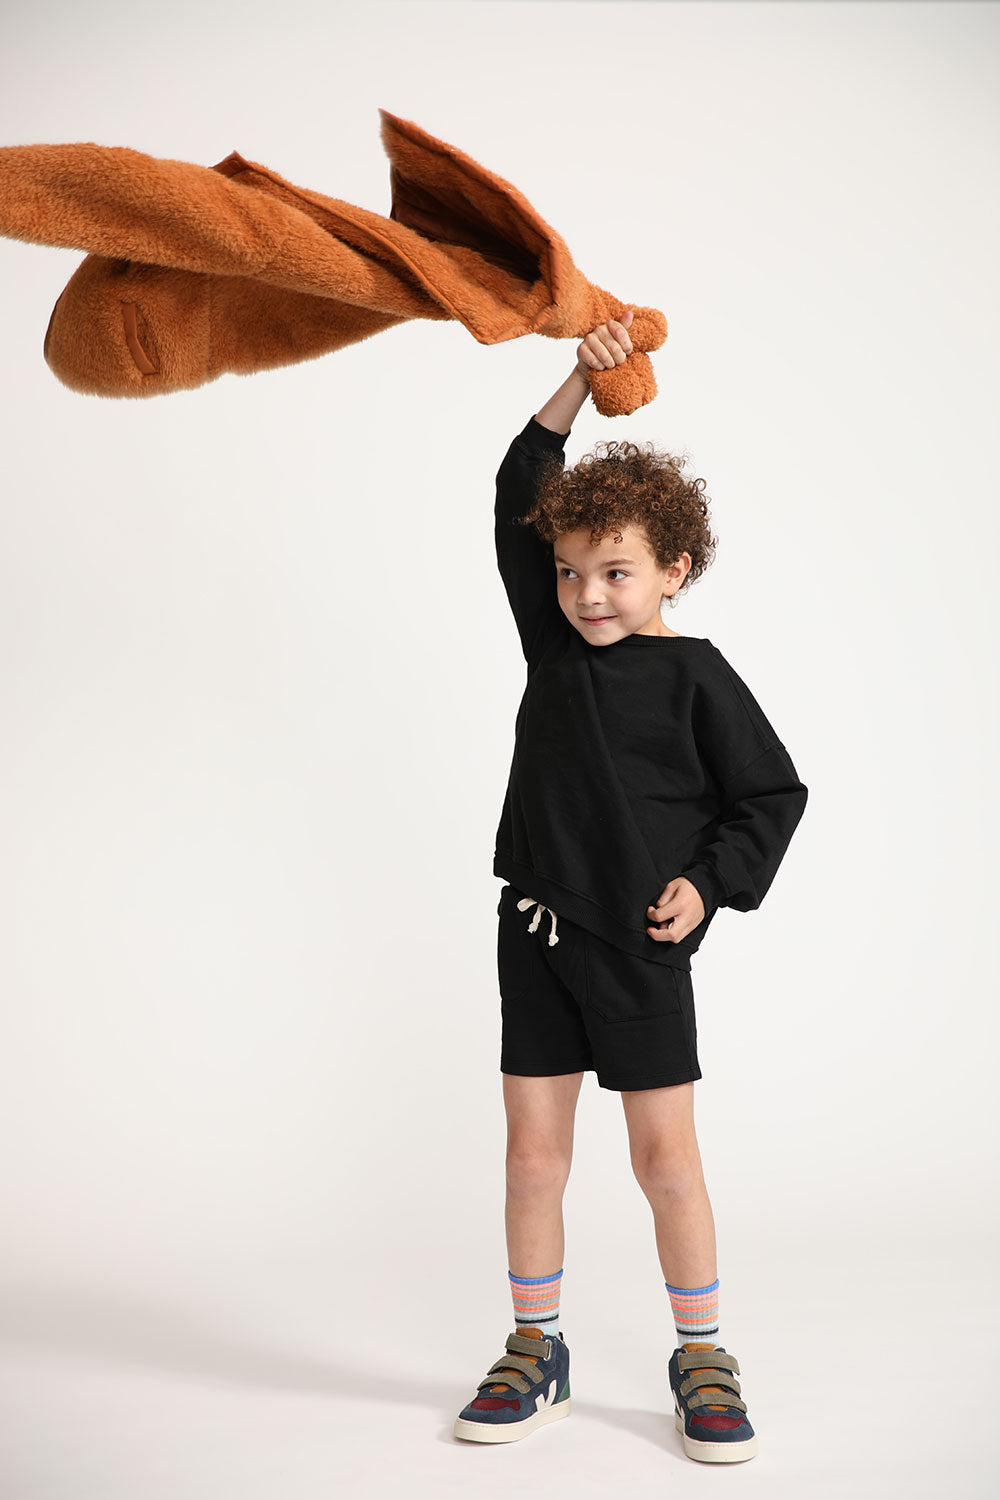 Young boy wearing Everyway kids activewear. Featuring Core Sweat Shirt in Black.